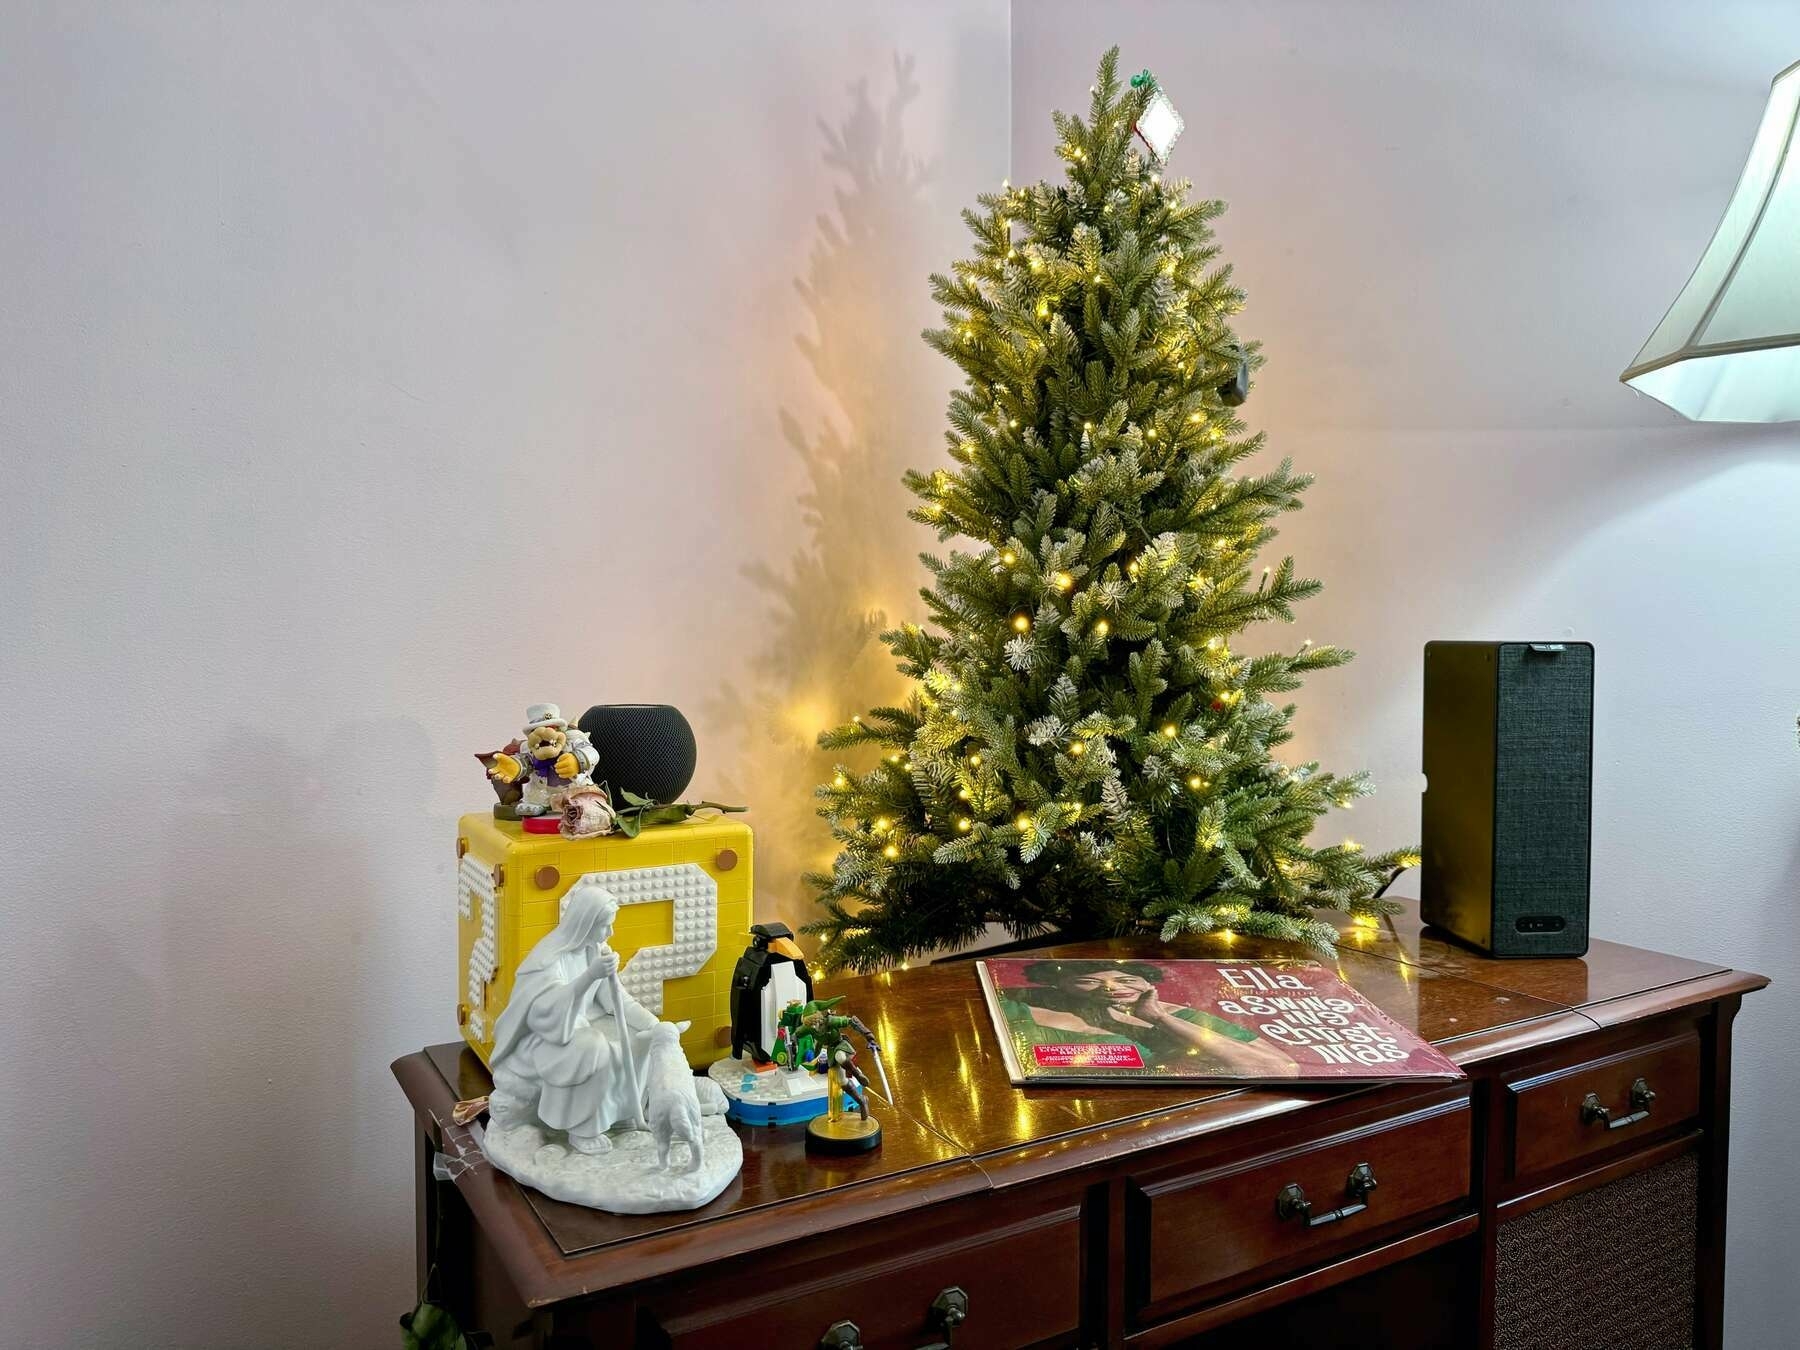 Christmas tree with lights and one ornament at the top (a photo frame with no photo for privacy purposes), in front of a record player, with the end of a lamp on the right side of the photo. An IKEA Sonos speaker is on top of the record player, with an 'Ella' record in the middle and a series of objects is on the left side of the record player: three Nintendo amiibo figures (Link, Bowser, and Bokoblin), a Lego penguin, a Jesus stature, and a N64 Lego cube. On top of the cube is a HomePod mini, along with two of the amiibo, and a dried pink rose.